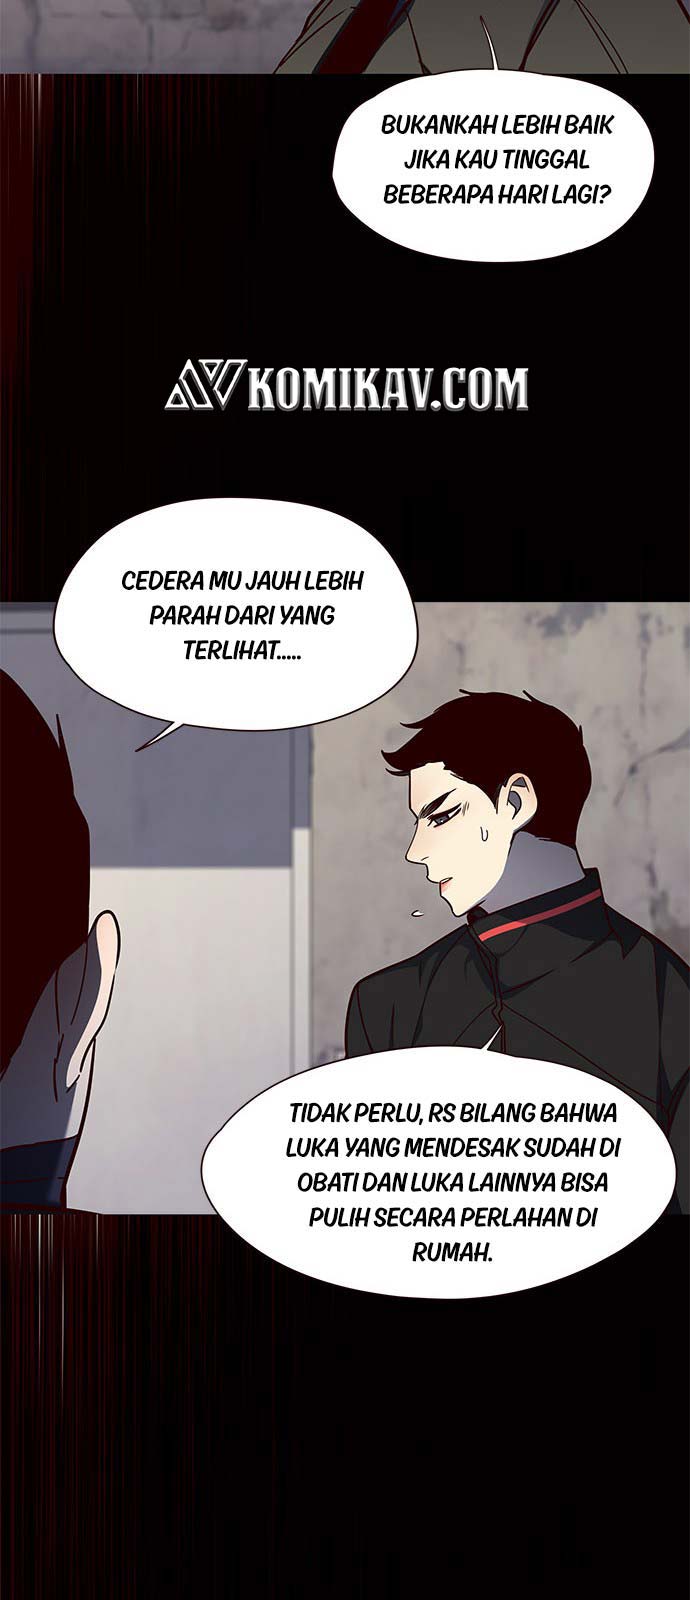 Eleceed Chapter 47